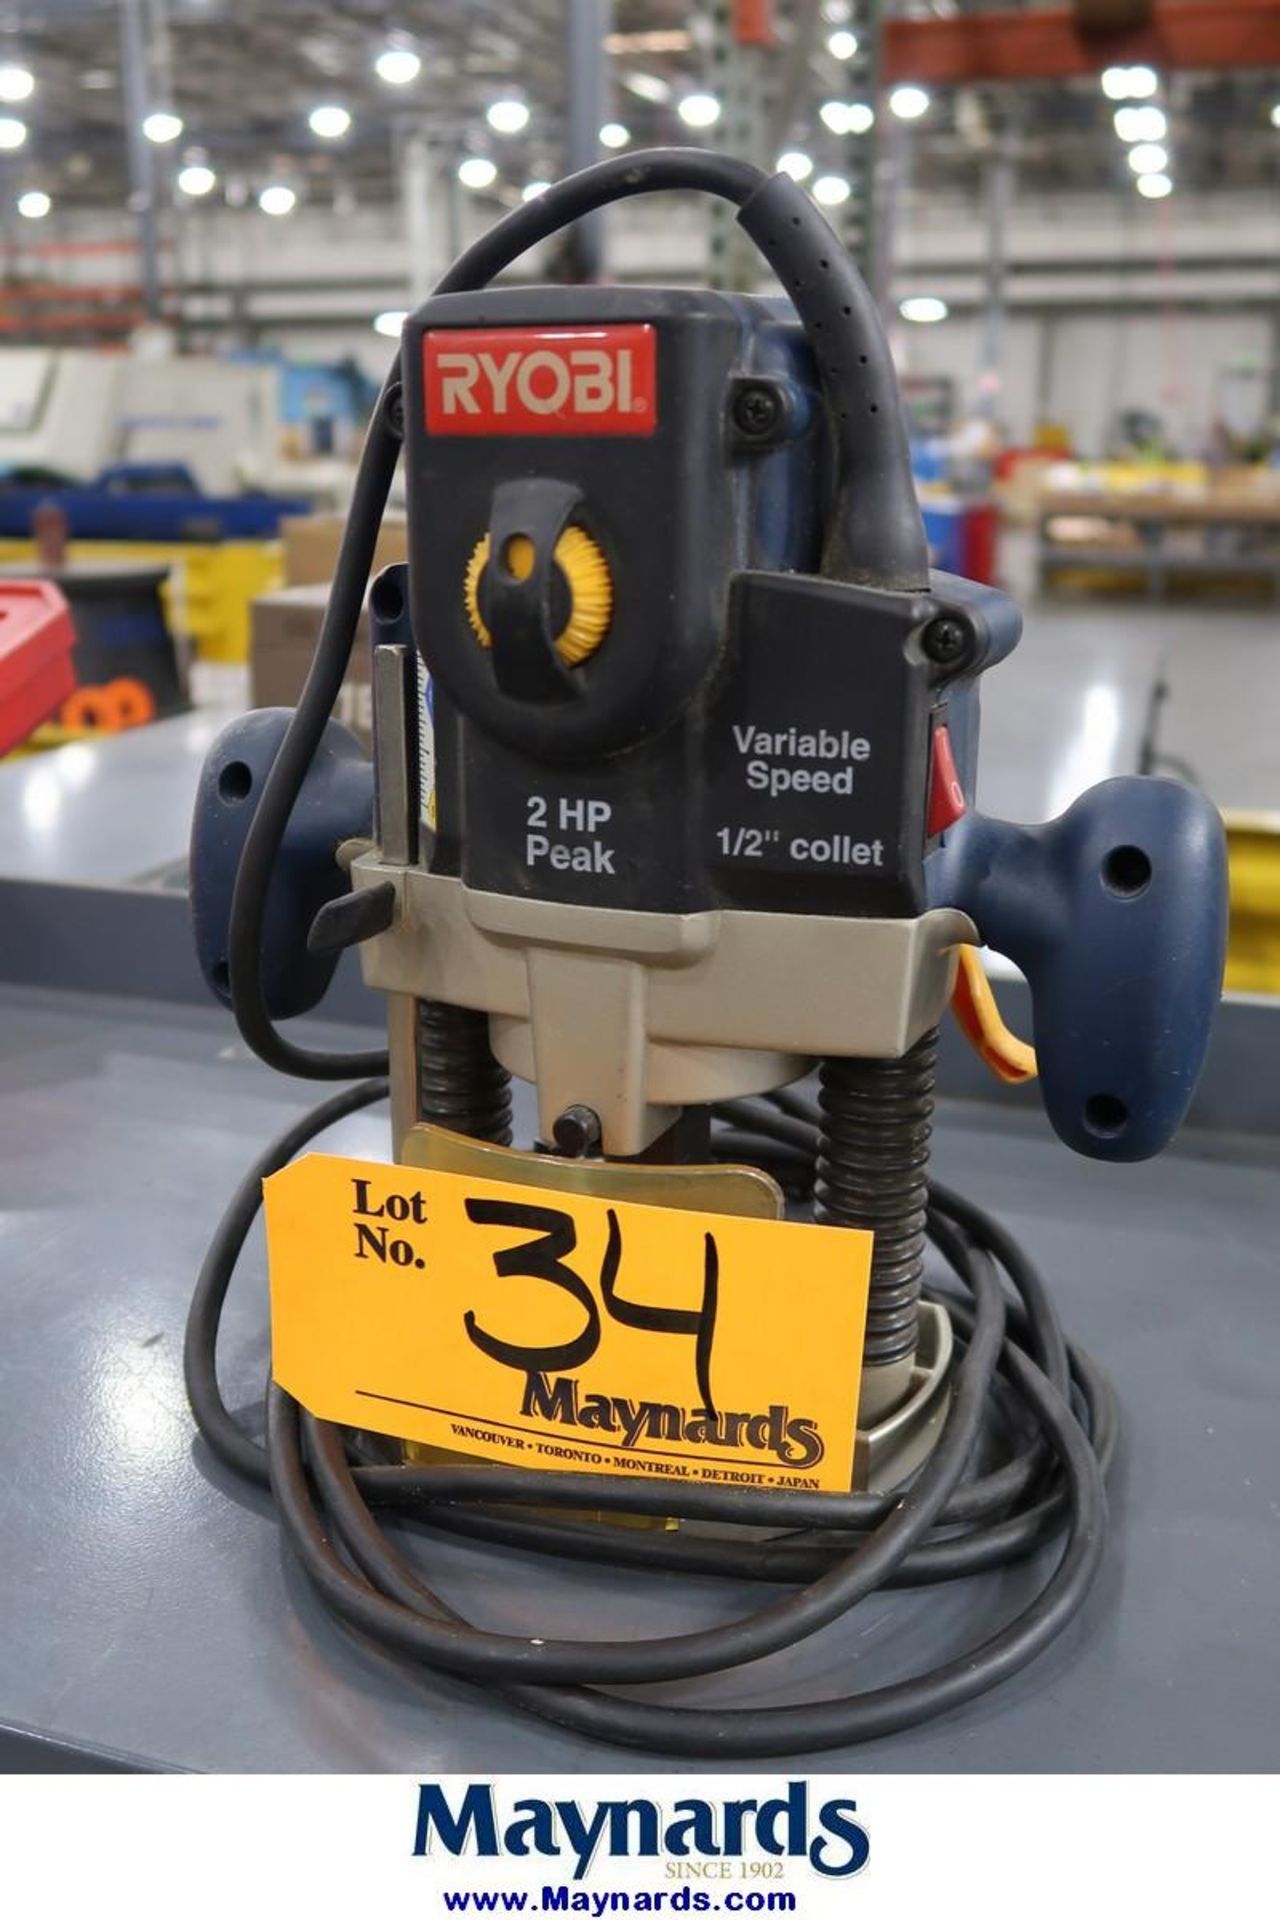 Ryobi RE180PL1 Variable Speed Router